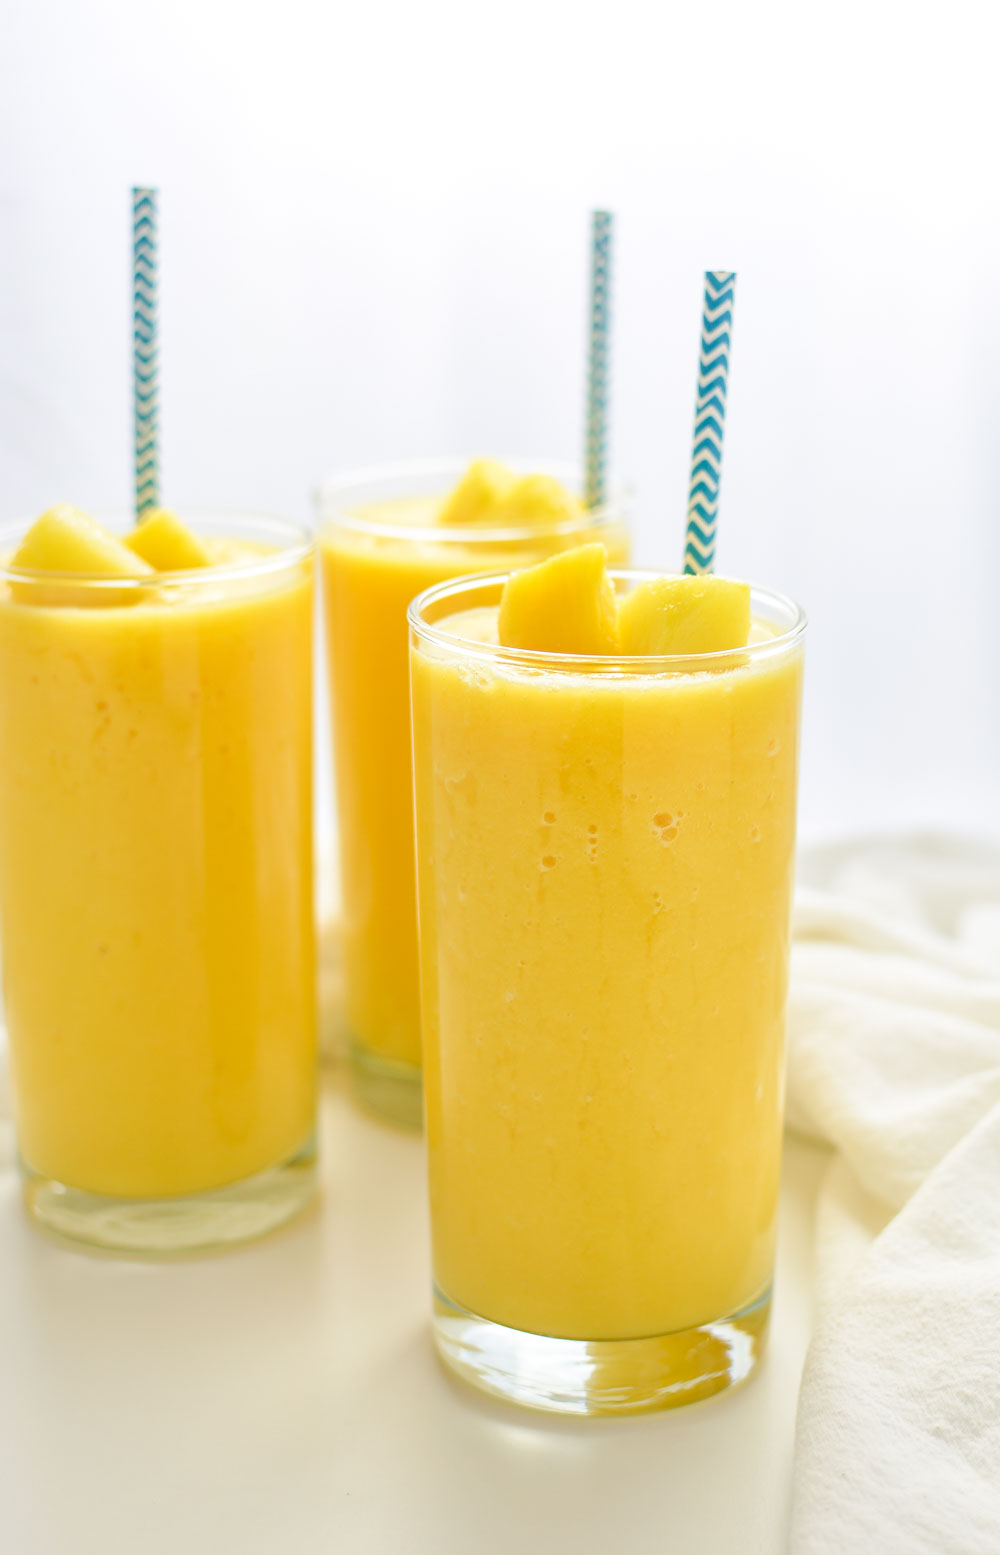 Orange pineapple smoothies are a great and refreshing way to start the day!